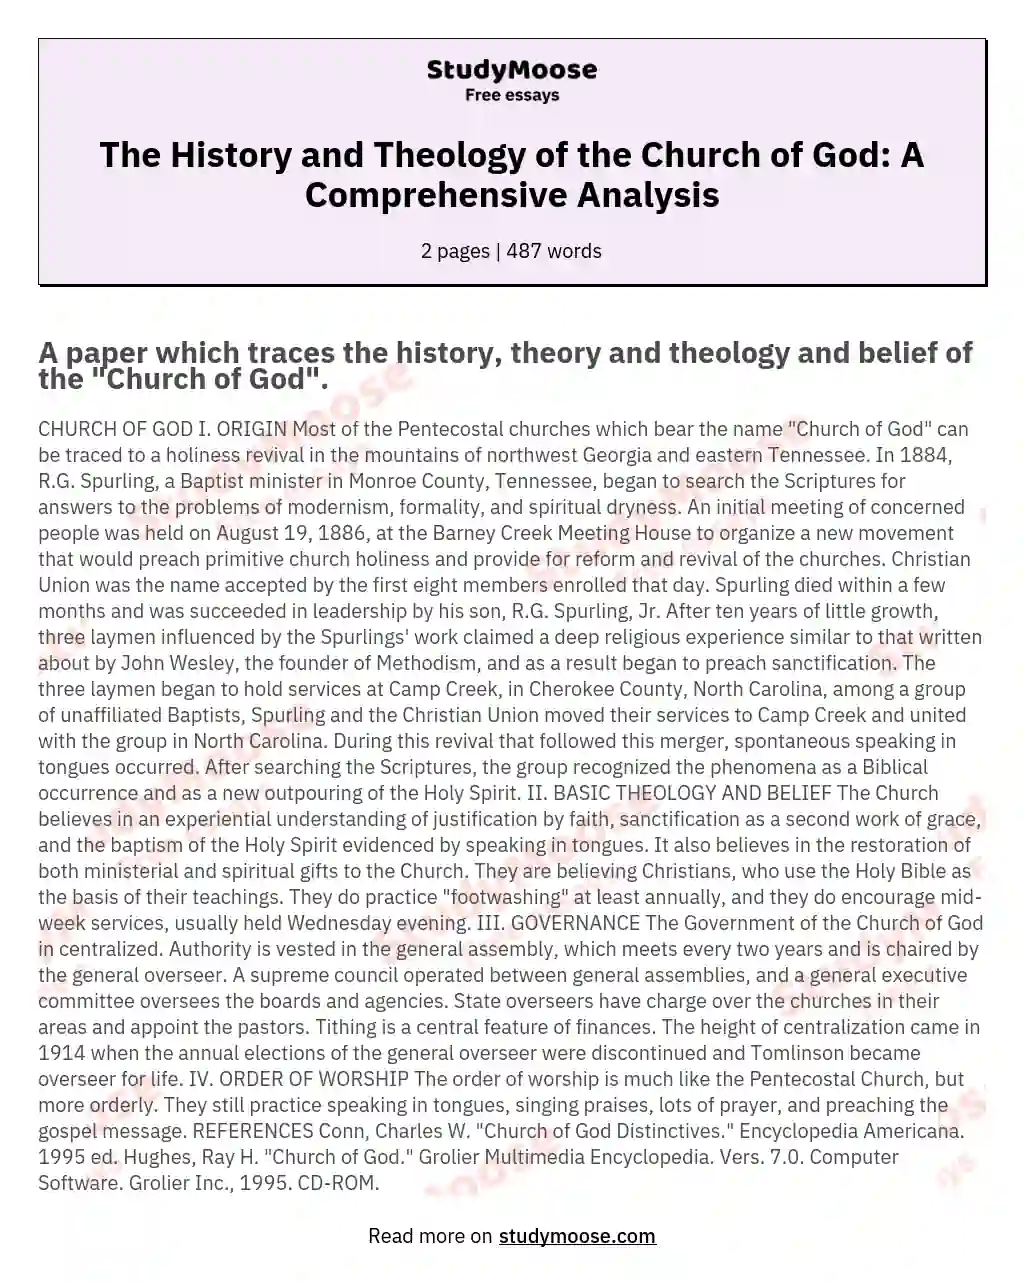 The History and Theology of the Church of God: A Comprehensive Analysis